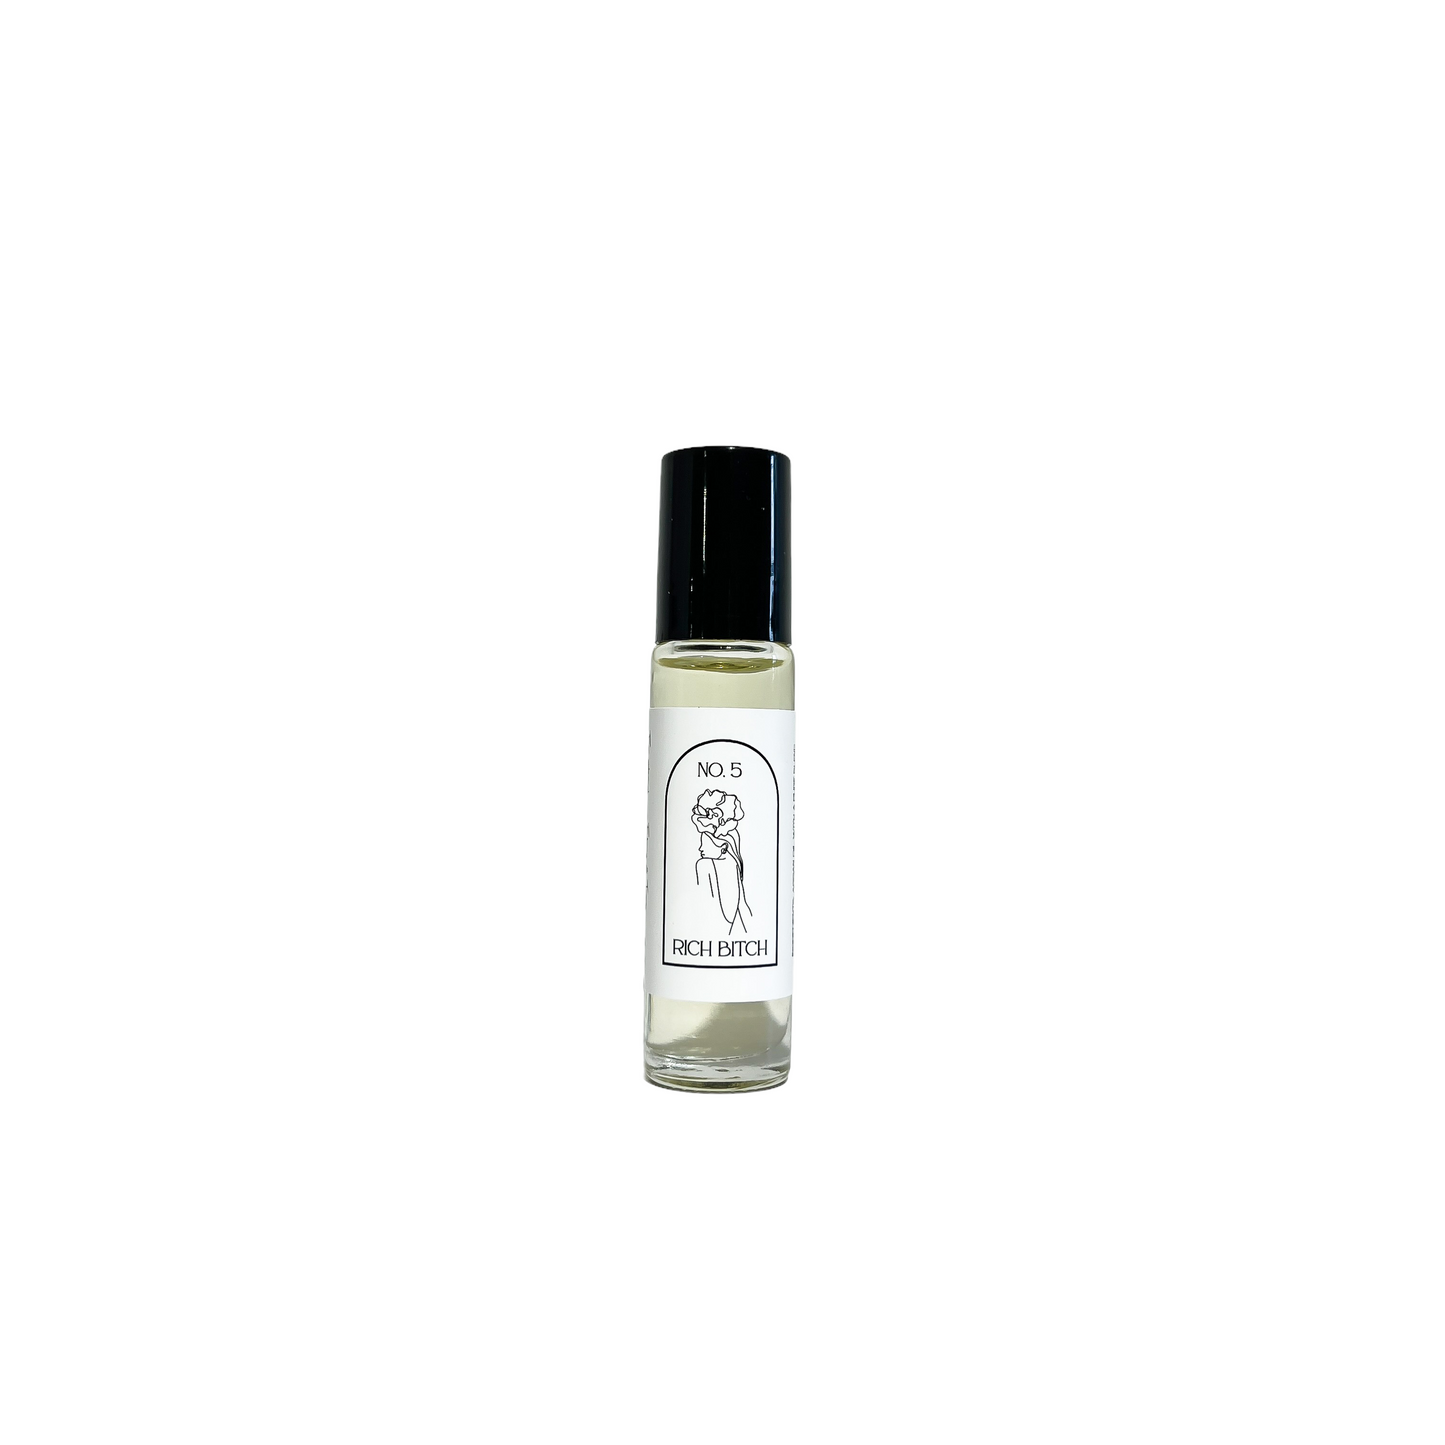 Clear, ten milliliter, oud, bergamot, and citrus scented roll-on applicator with a black and a white label that reads Rich Bitch